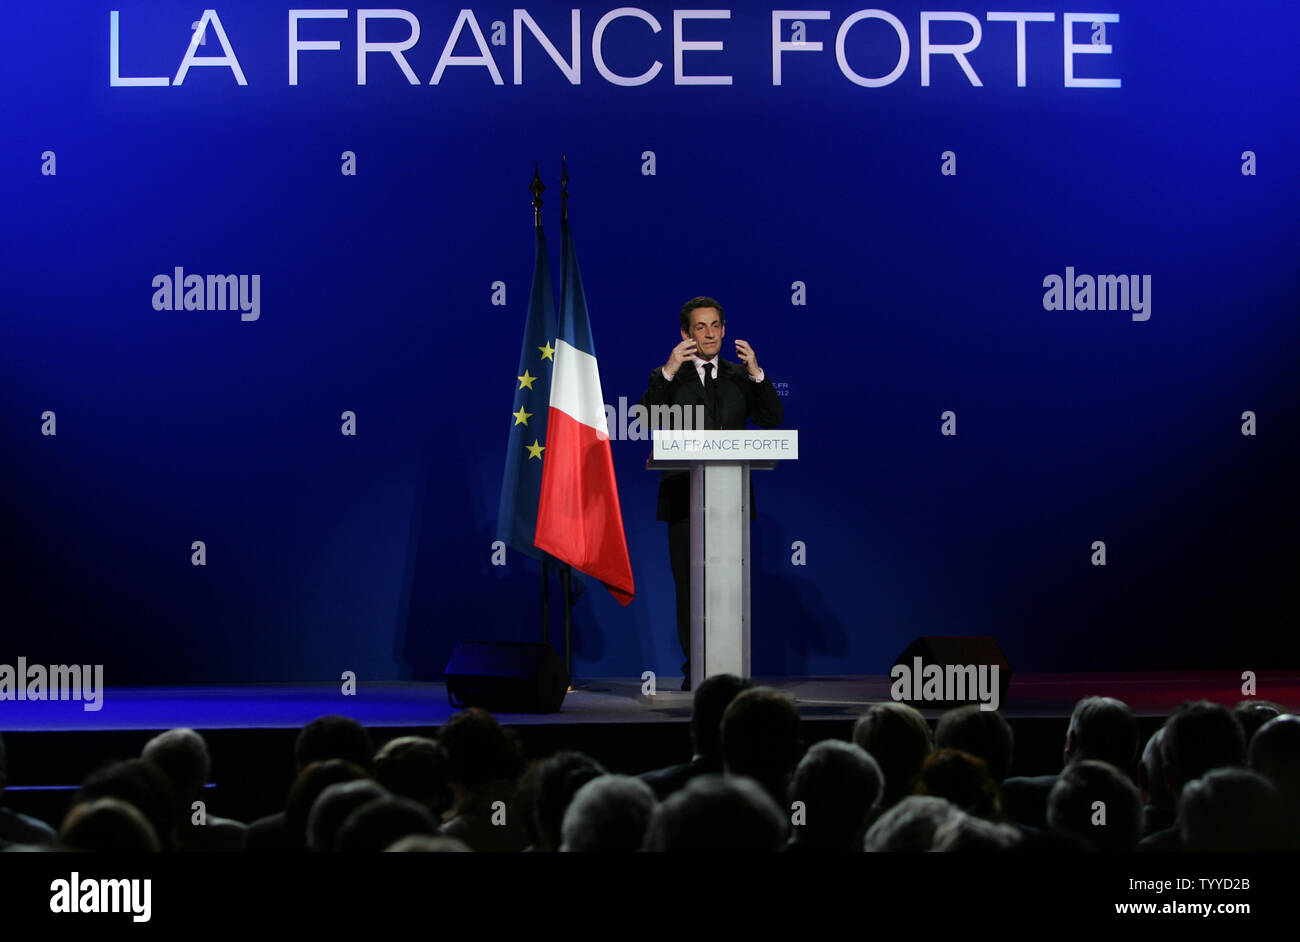 French President Nicolas Sarkozy campaigns at a public meeting on March 28, 2012 in Elancourt, near Paris, France. Polls showed that the conservative candidate has caught up with his Socialist challenger in the first round of a presidential election next month. UPI/Eco Clement Stock Photo